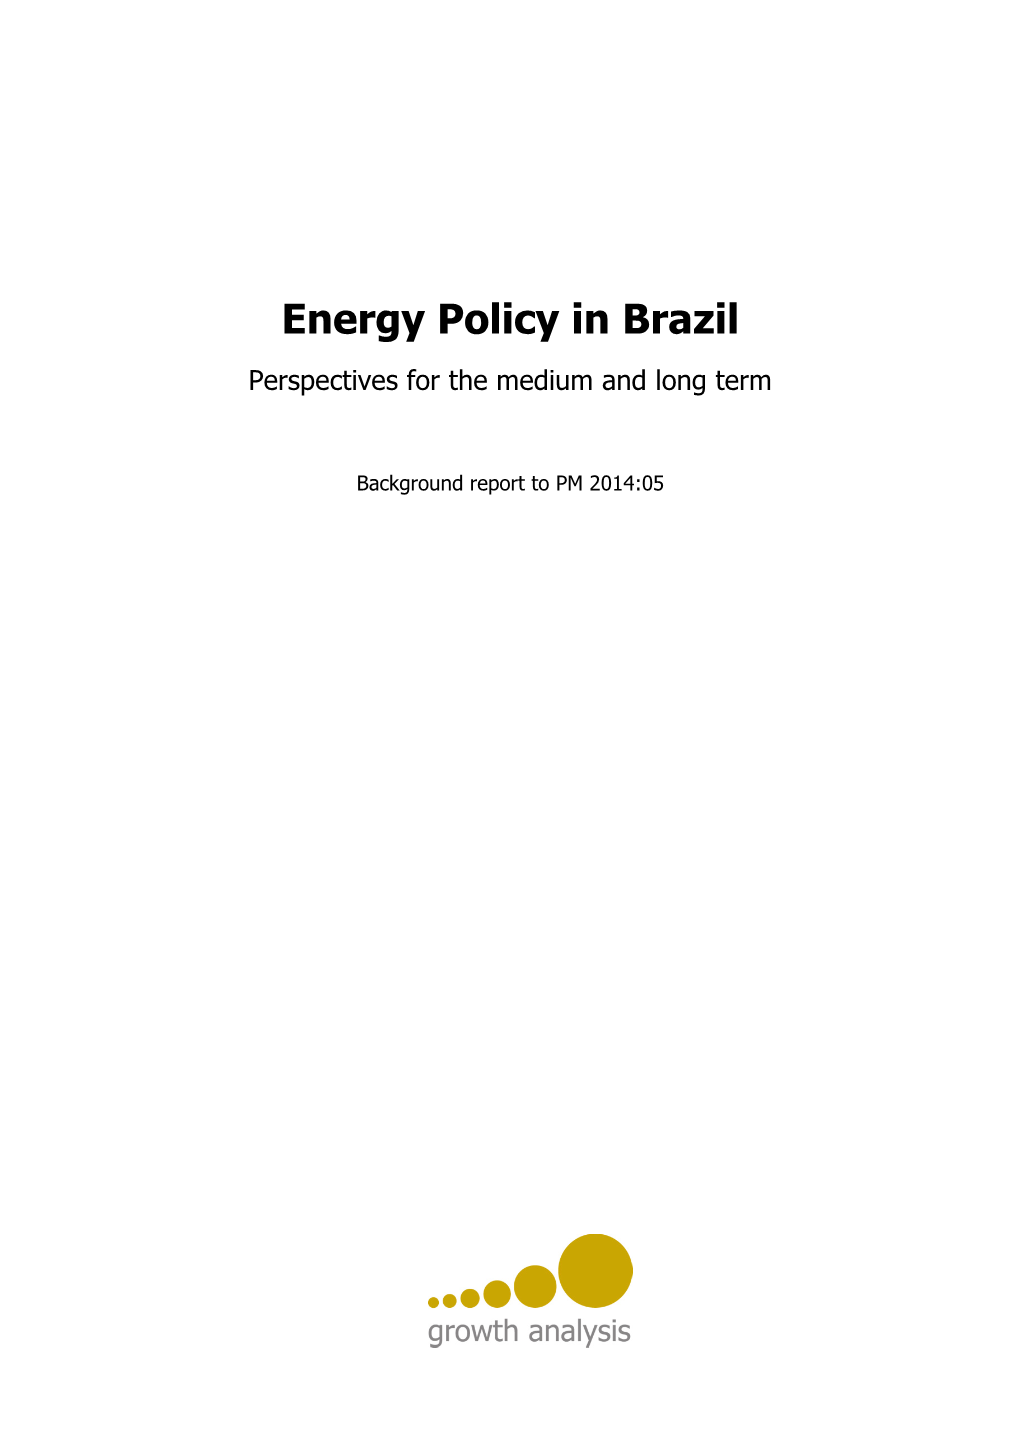 Energy Policy in Brazil Perspectives for the Medium and Long Term